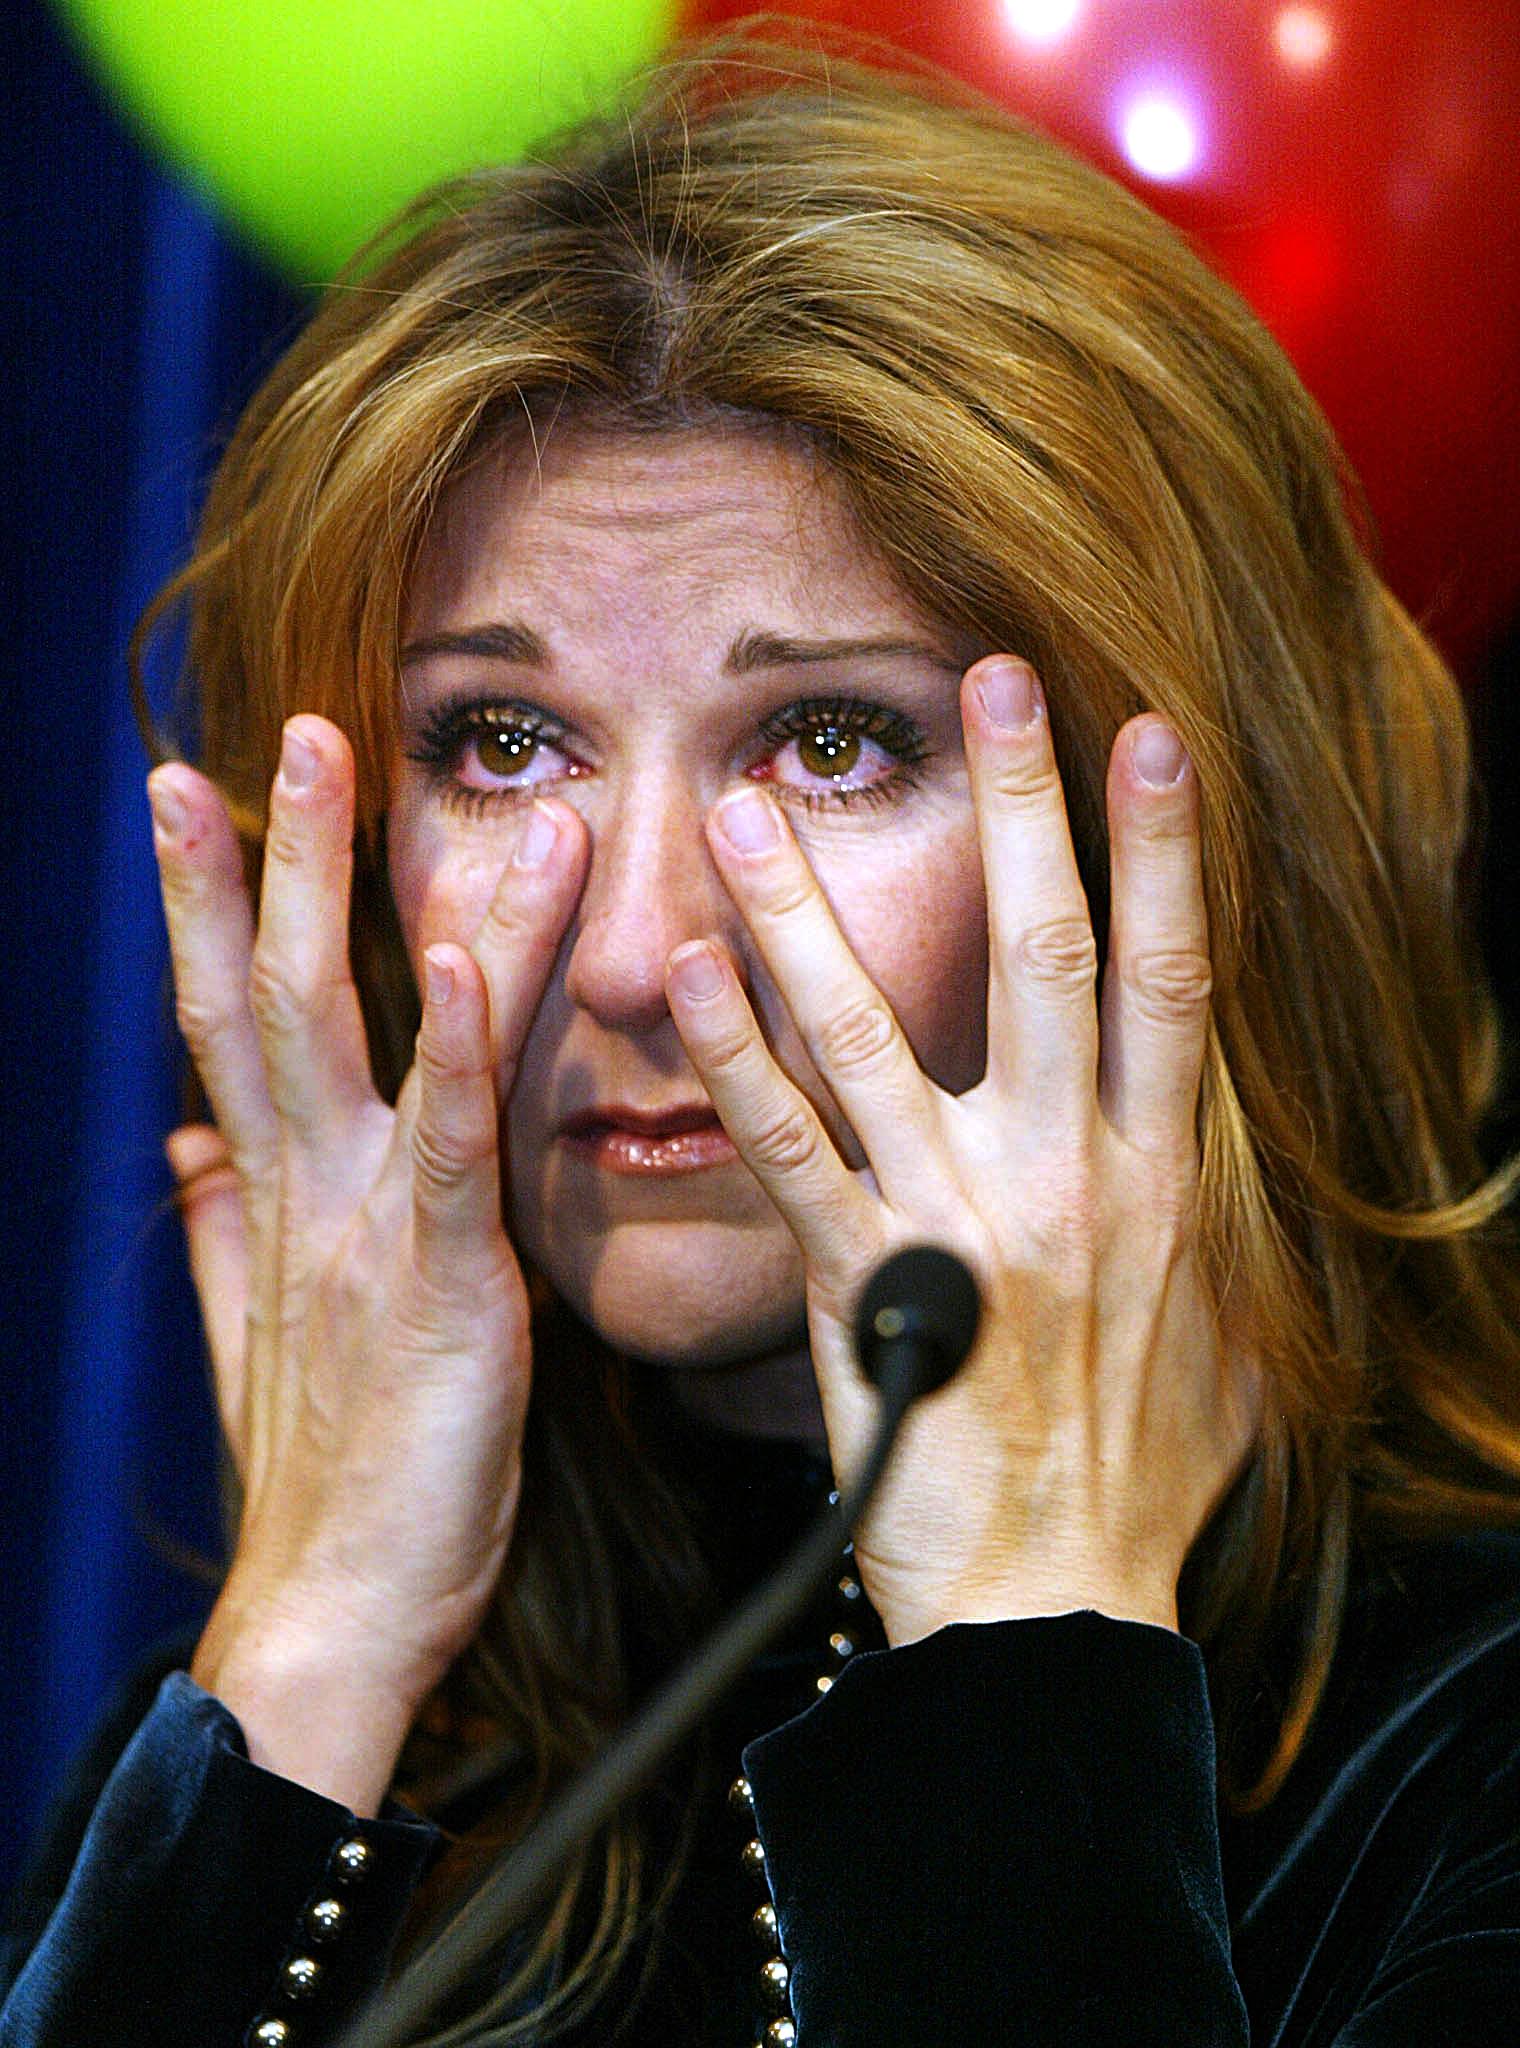 Celine Dion wipes away tears while speaking at Sainte-Justine Children's Hospital in Montreal, Canada on December 18, 2002. | Source: Getty Images